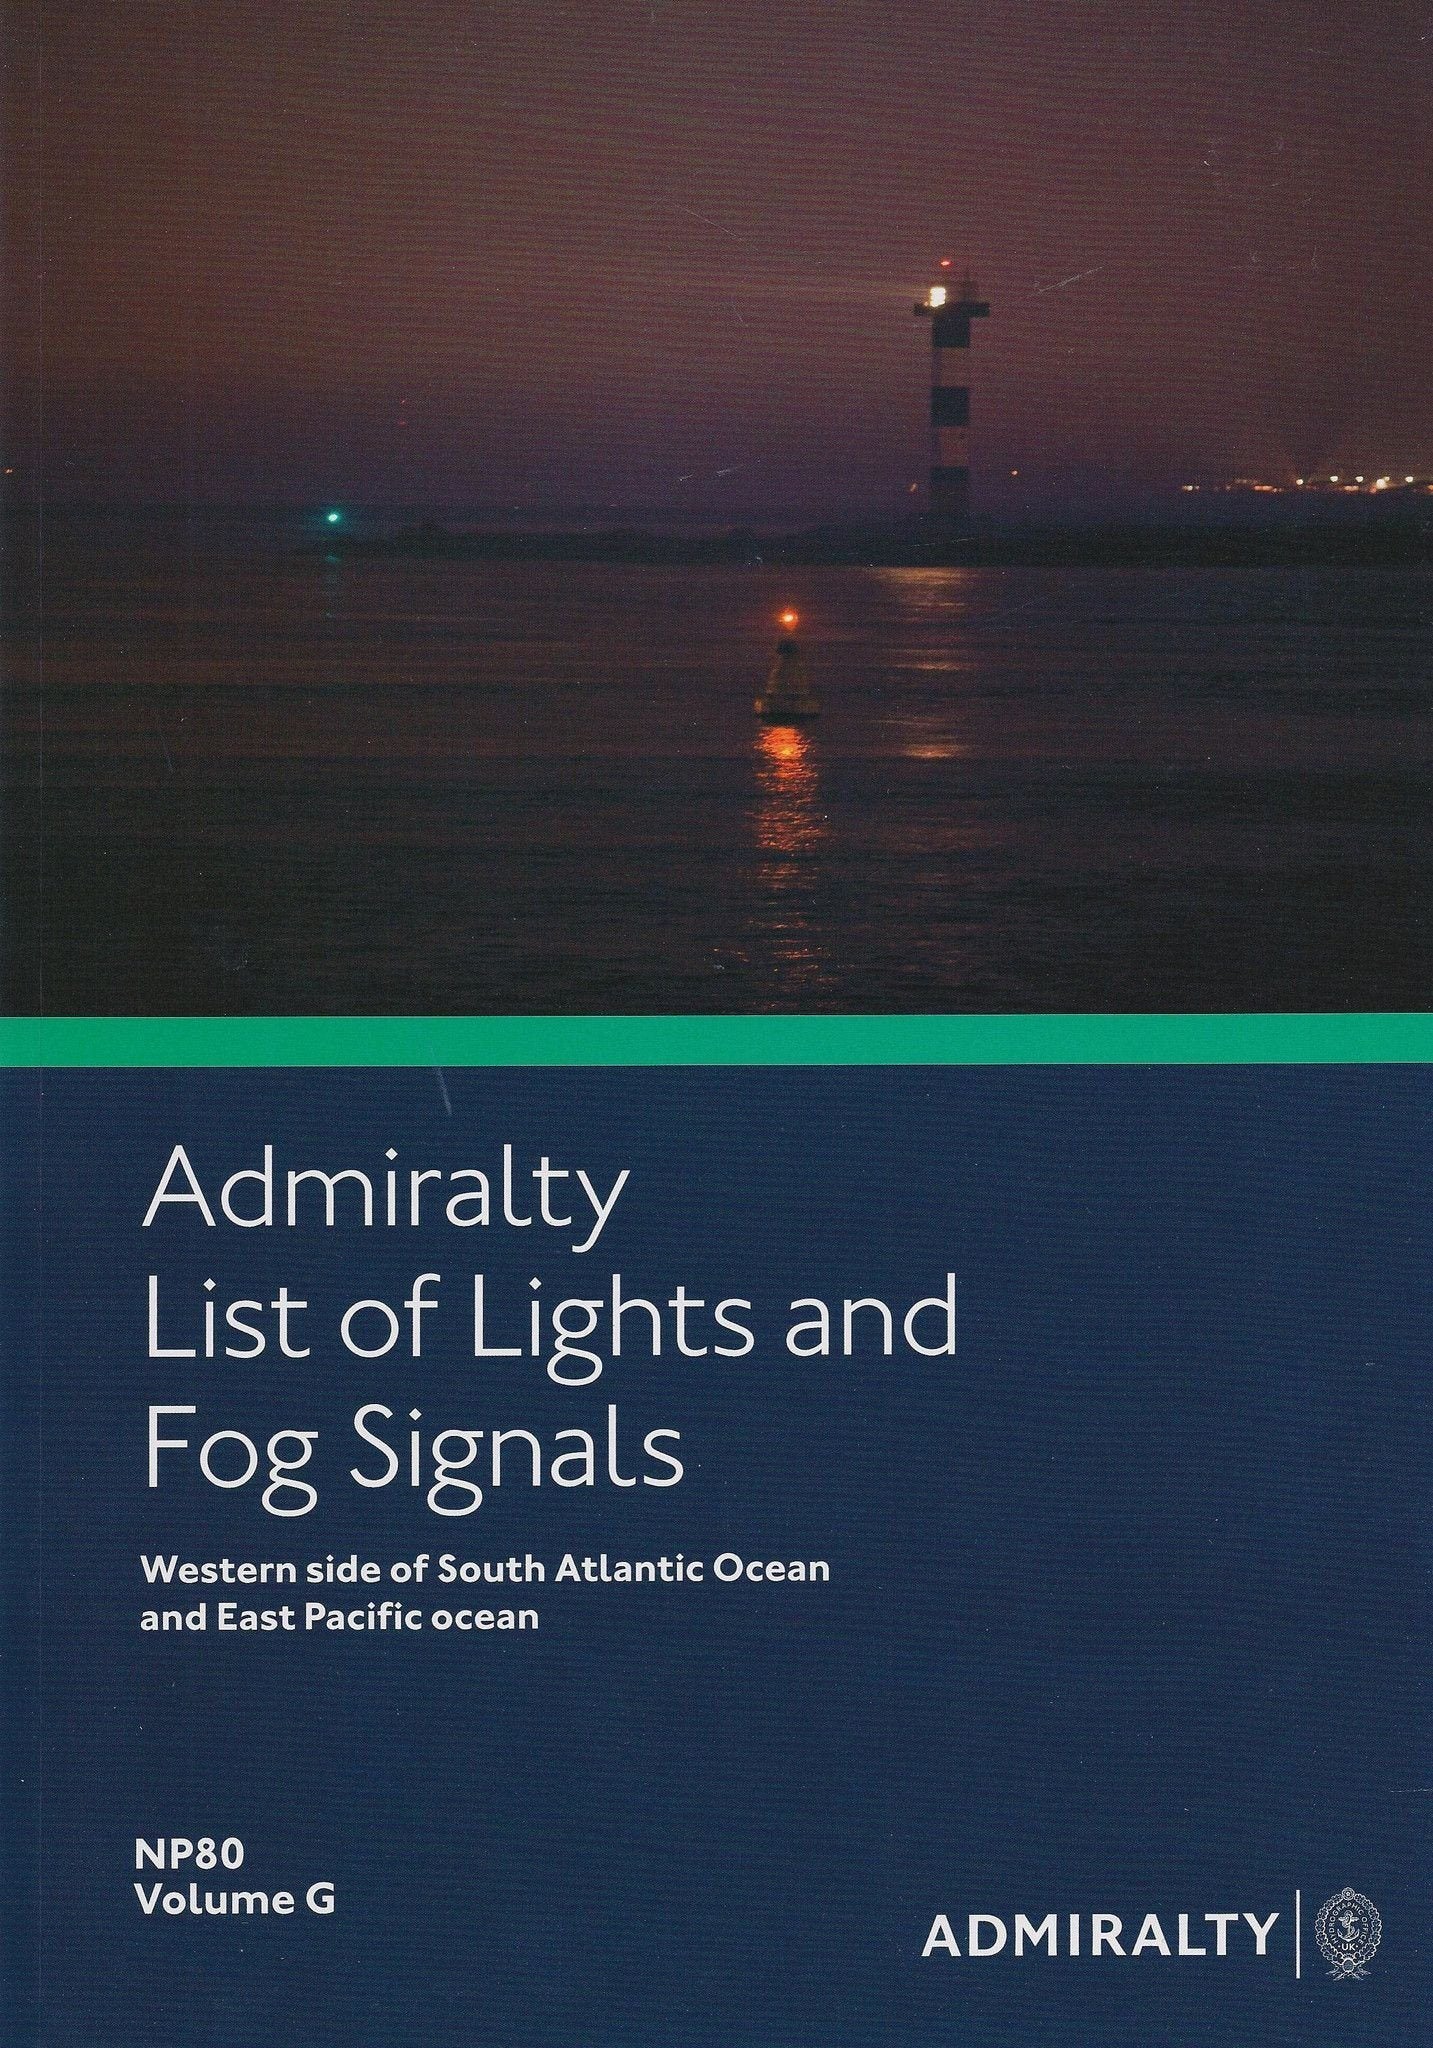 ADMIRALTY List of Lights and Fog Signals | ADMIRALTY Publications